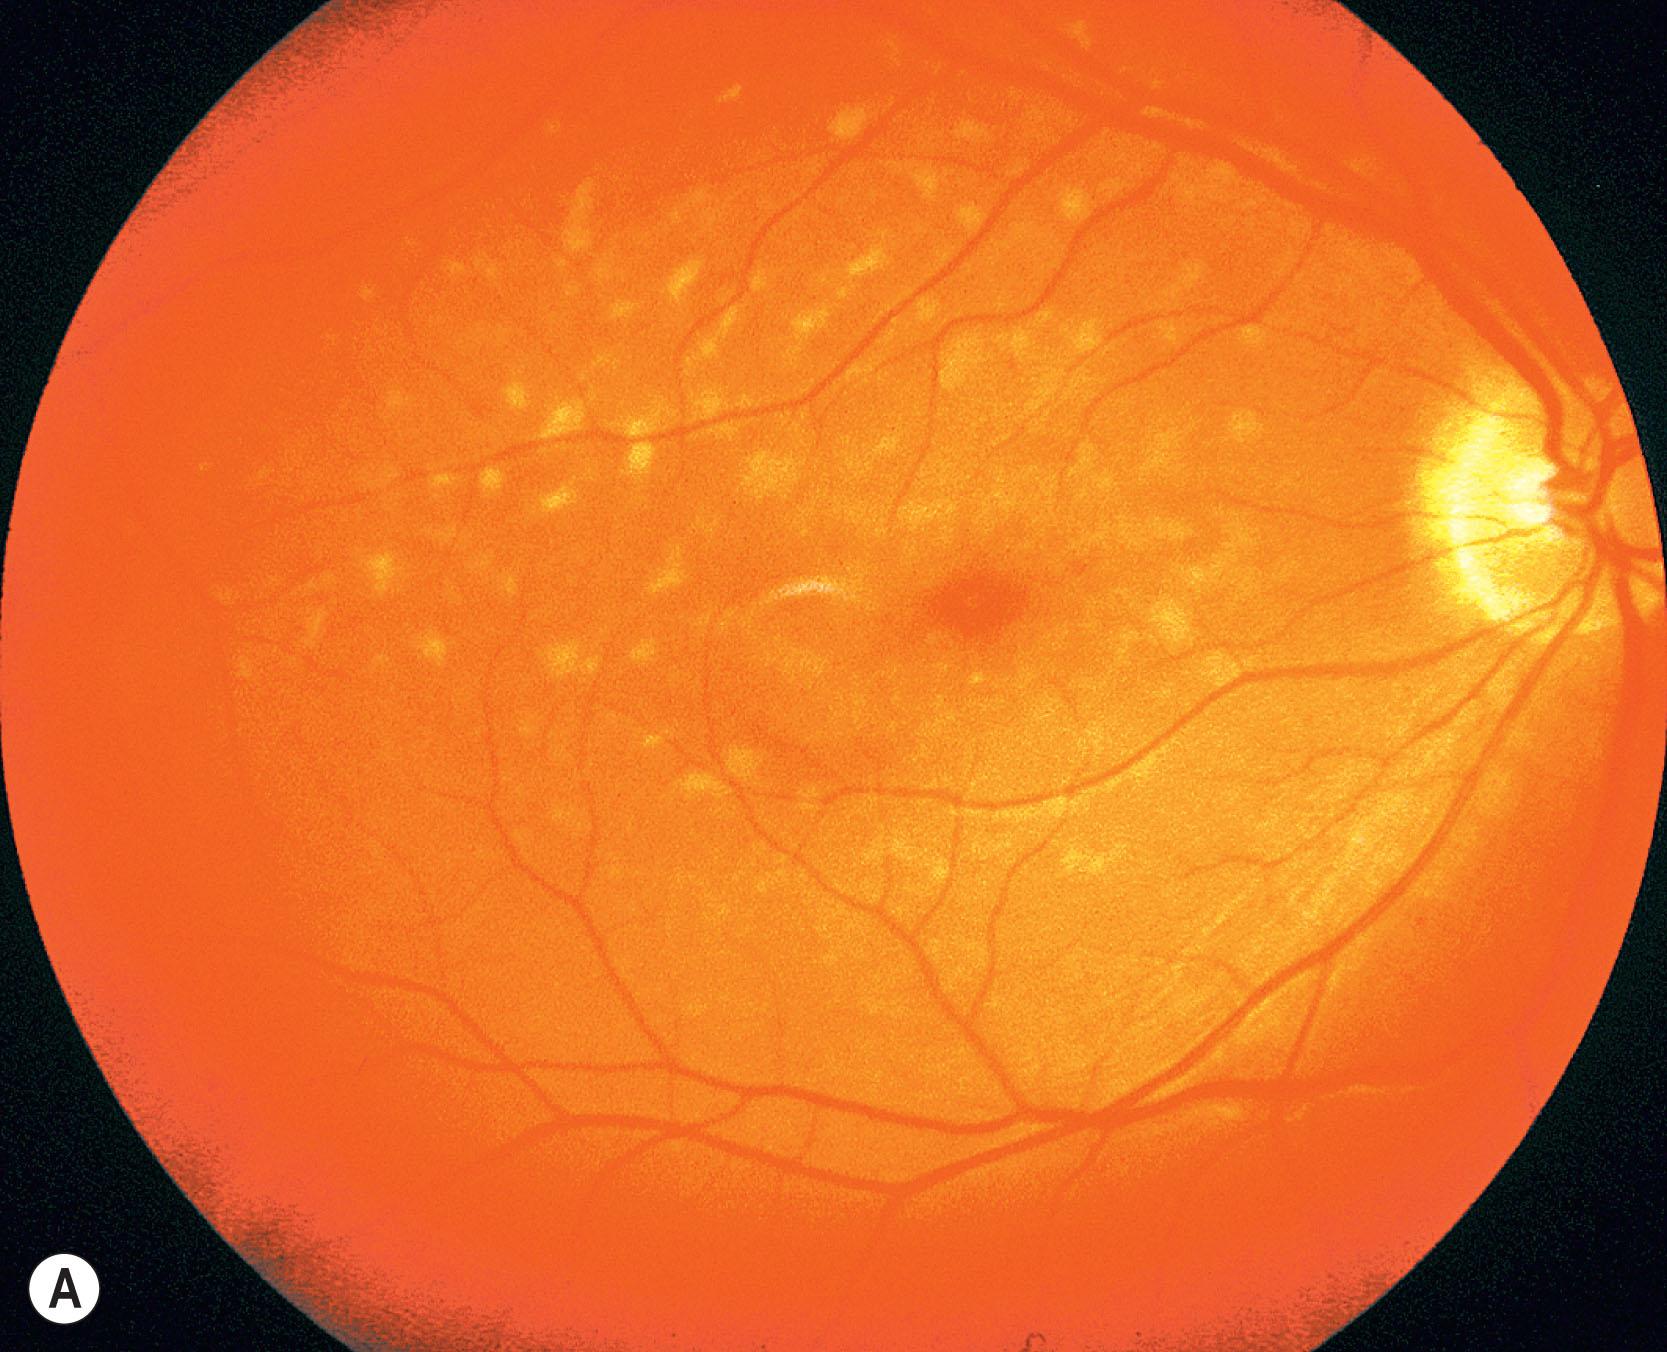 Fig. 47.2, Stargardt disease. Fluorescein angiogram (B) showing “dark choroid” and transmission defects with a color fundus photograph above (A) for comparison.